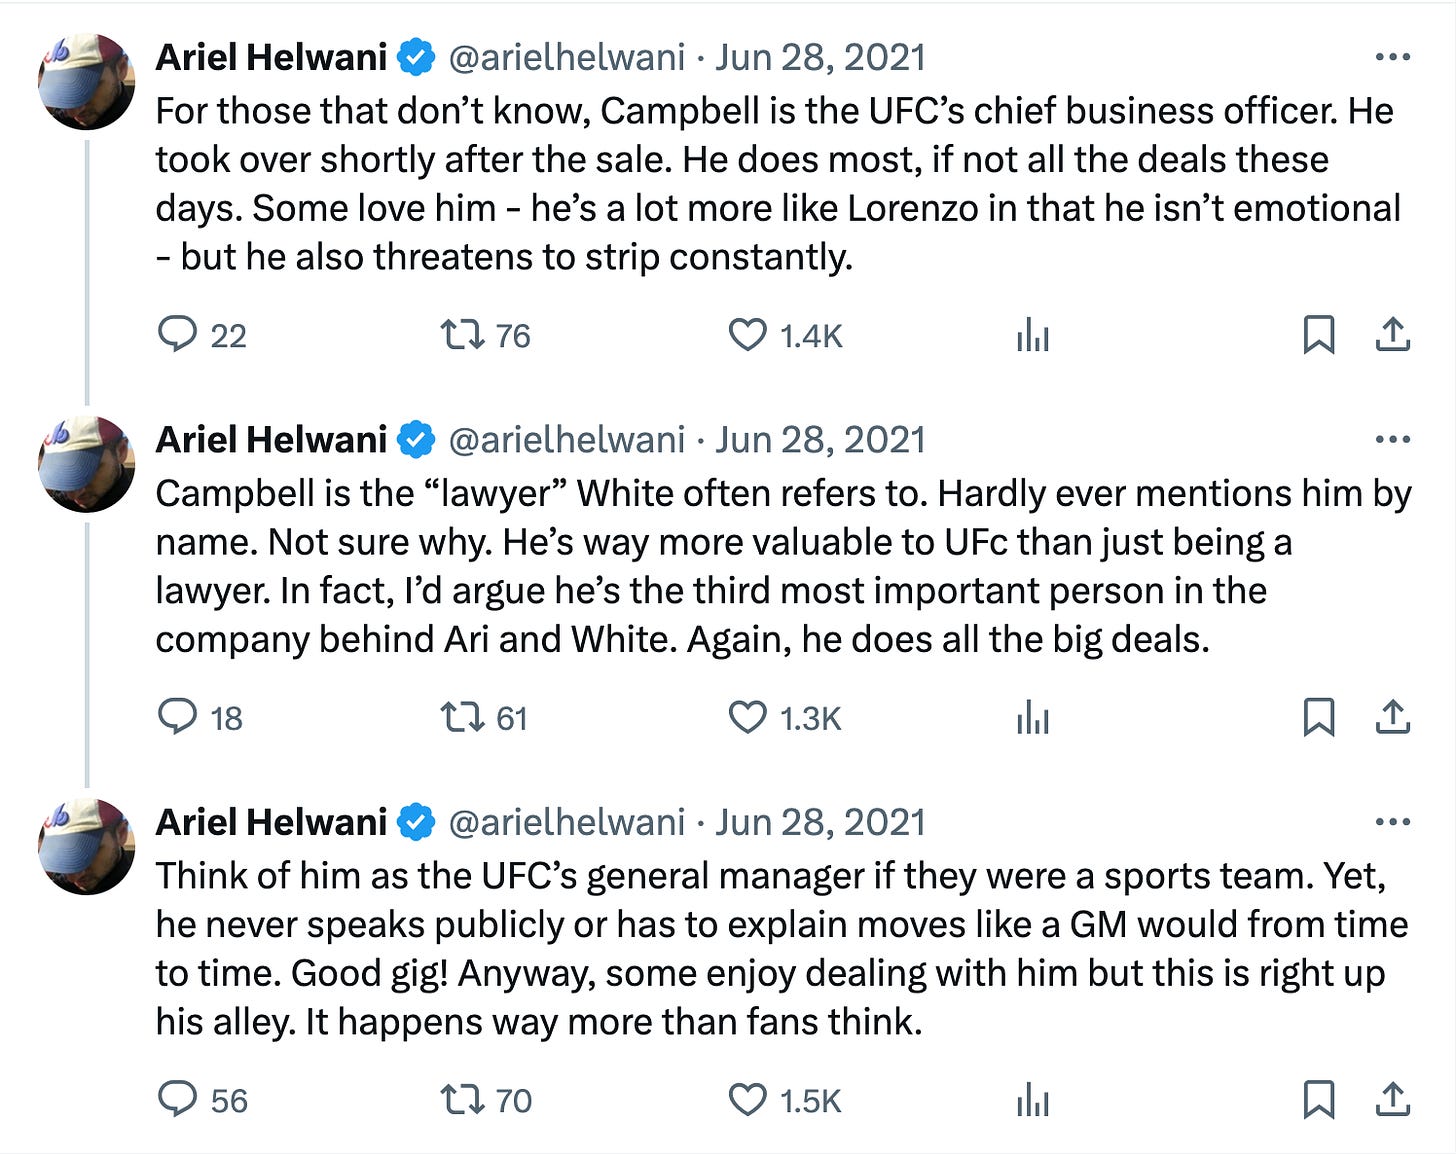 For those that don’t know, Campbell is the UFC’s chief business officer. He took over shortly after the sale. He does most, if not all the deals these days. Some love him - he’s a lot more like Lorenzo in that he isn’t emotional - but he also threatens to strip constantly. Campbell is the “lawyer” White often refers to. Hardly ever mentions him by name. Not sure why. He’s way more valuable to UFc than just being a lawyer. In fact, I’d argue he’s the third most important person in the company behind Ari and White. Again, he does all the big deals.Think of him as the UFC’s general manager if they were a sports team. Yet, he never speaks publicly or has to explain moves like a GM would from time to time. Good gig! Anyway, some enjoy dealing with him but this is right up his alley. It happens way more than fans think.